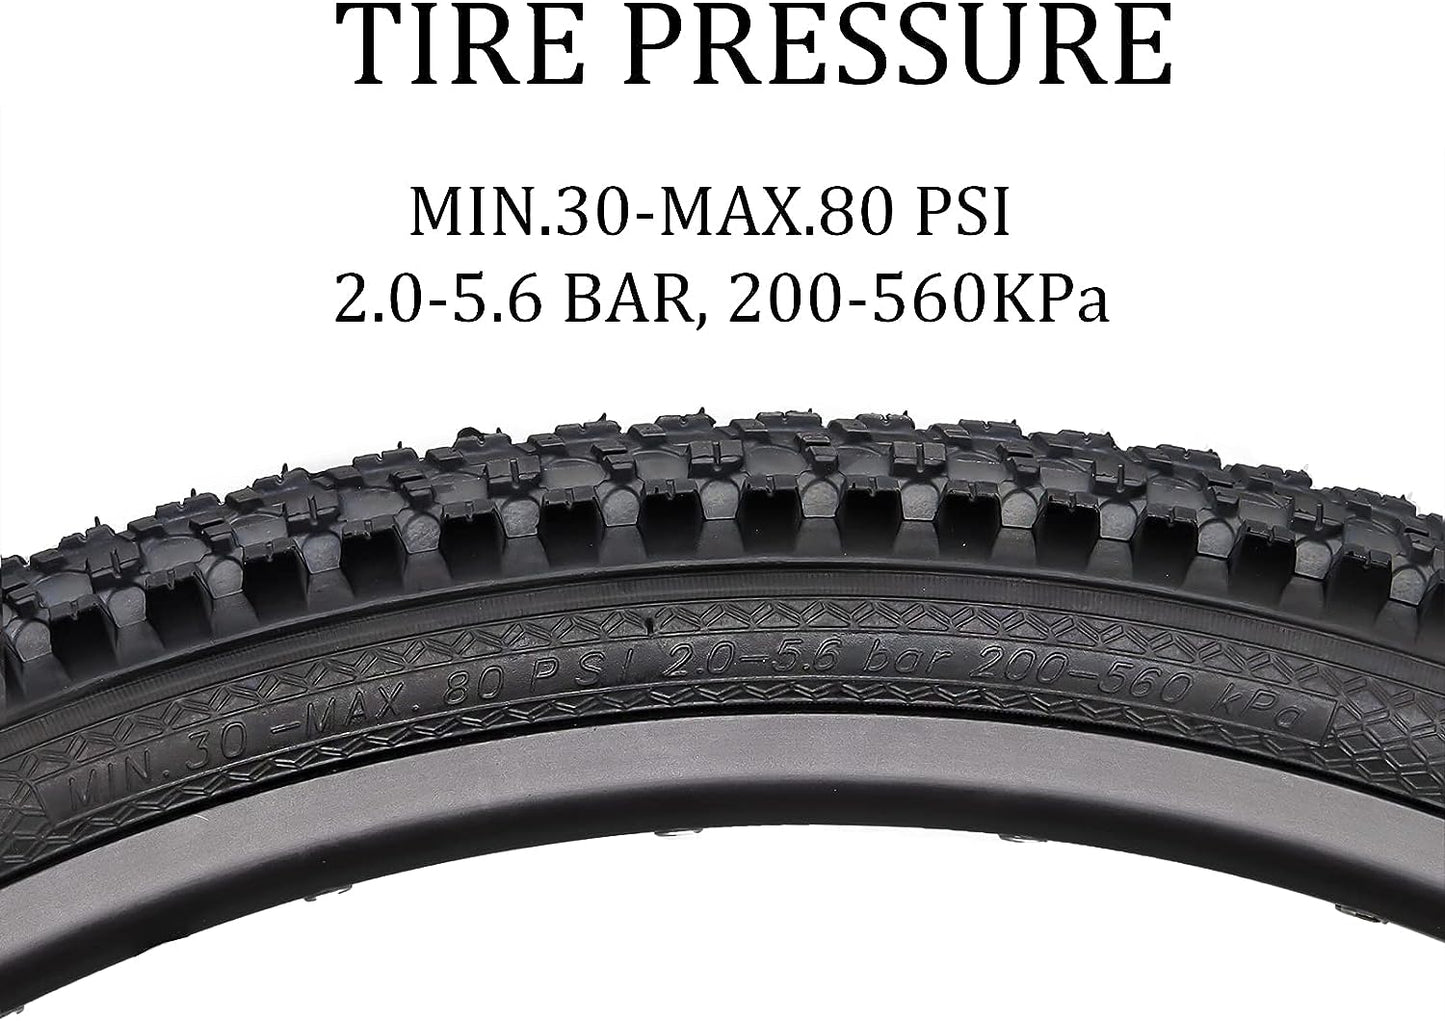 MTB Bicycle Tire, 26 x 1.95 Inch Folding Replacement Tire and Bike Tube